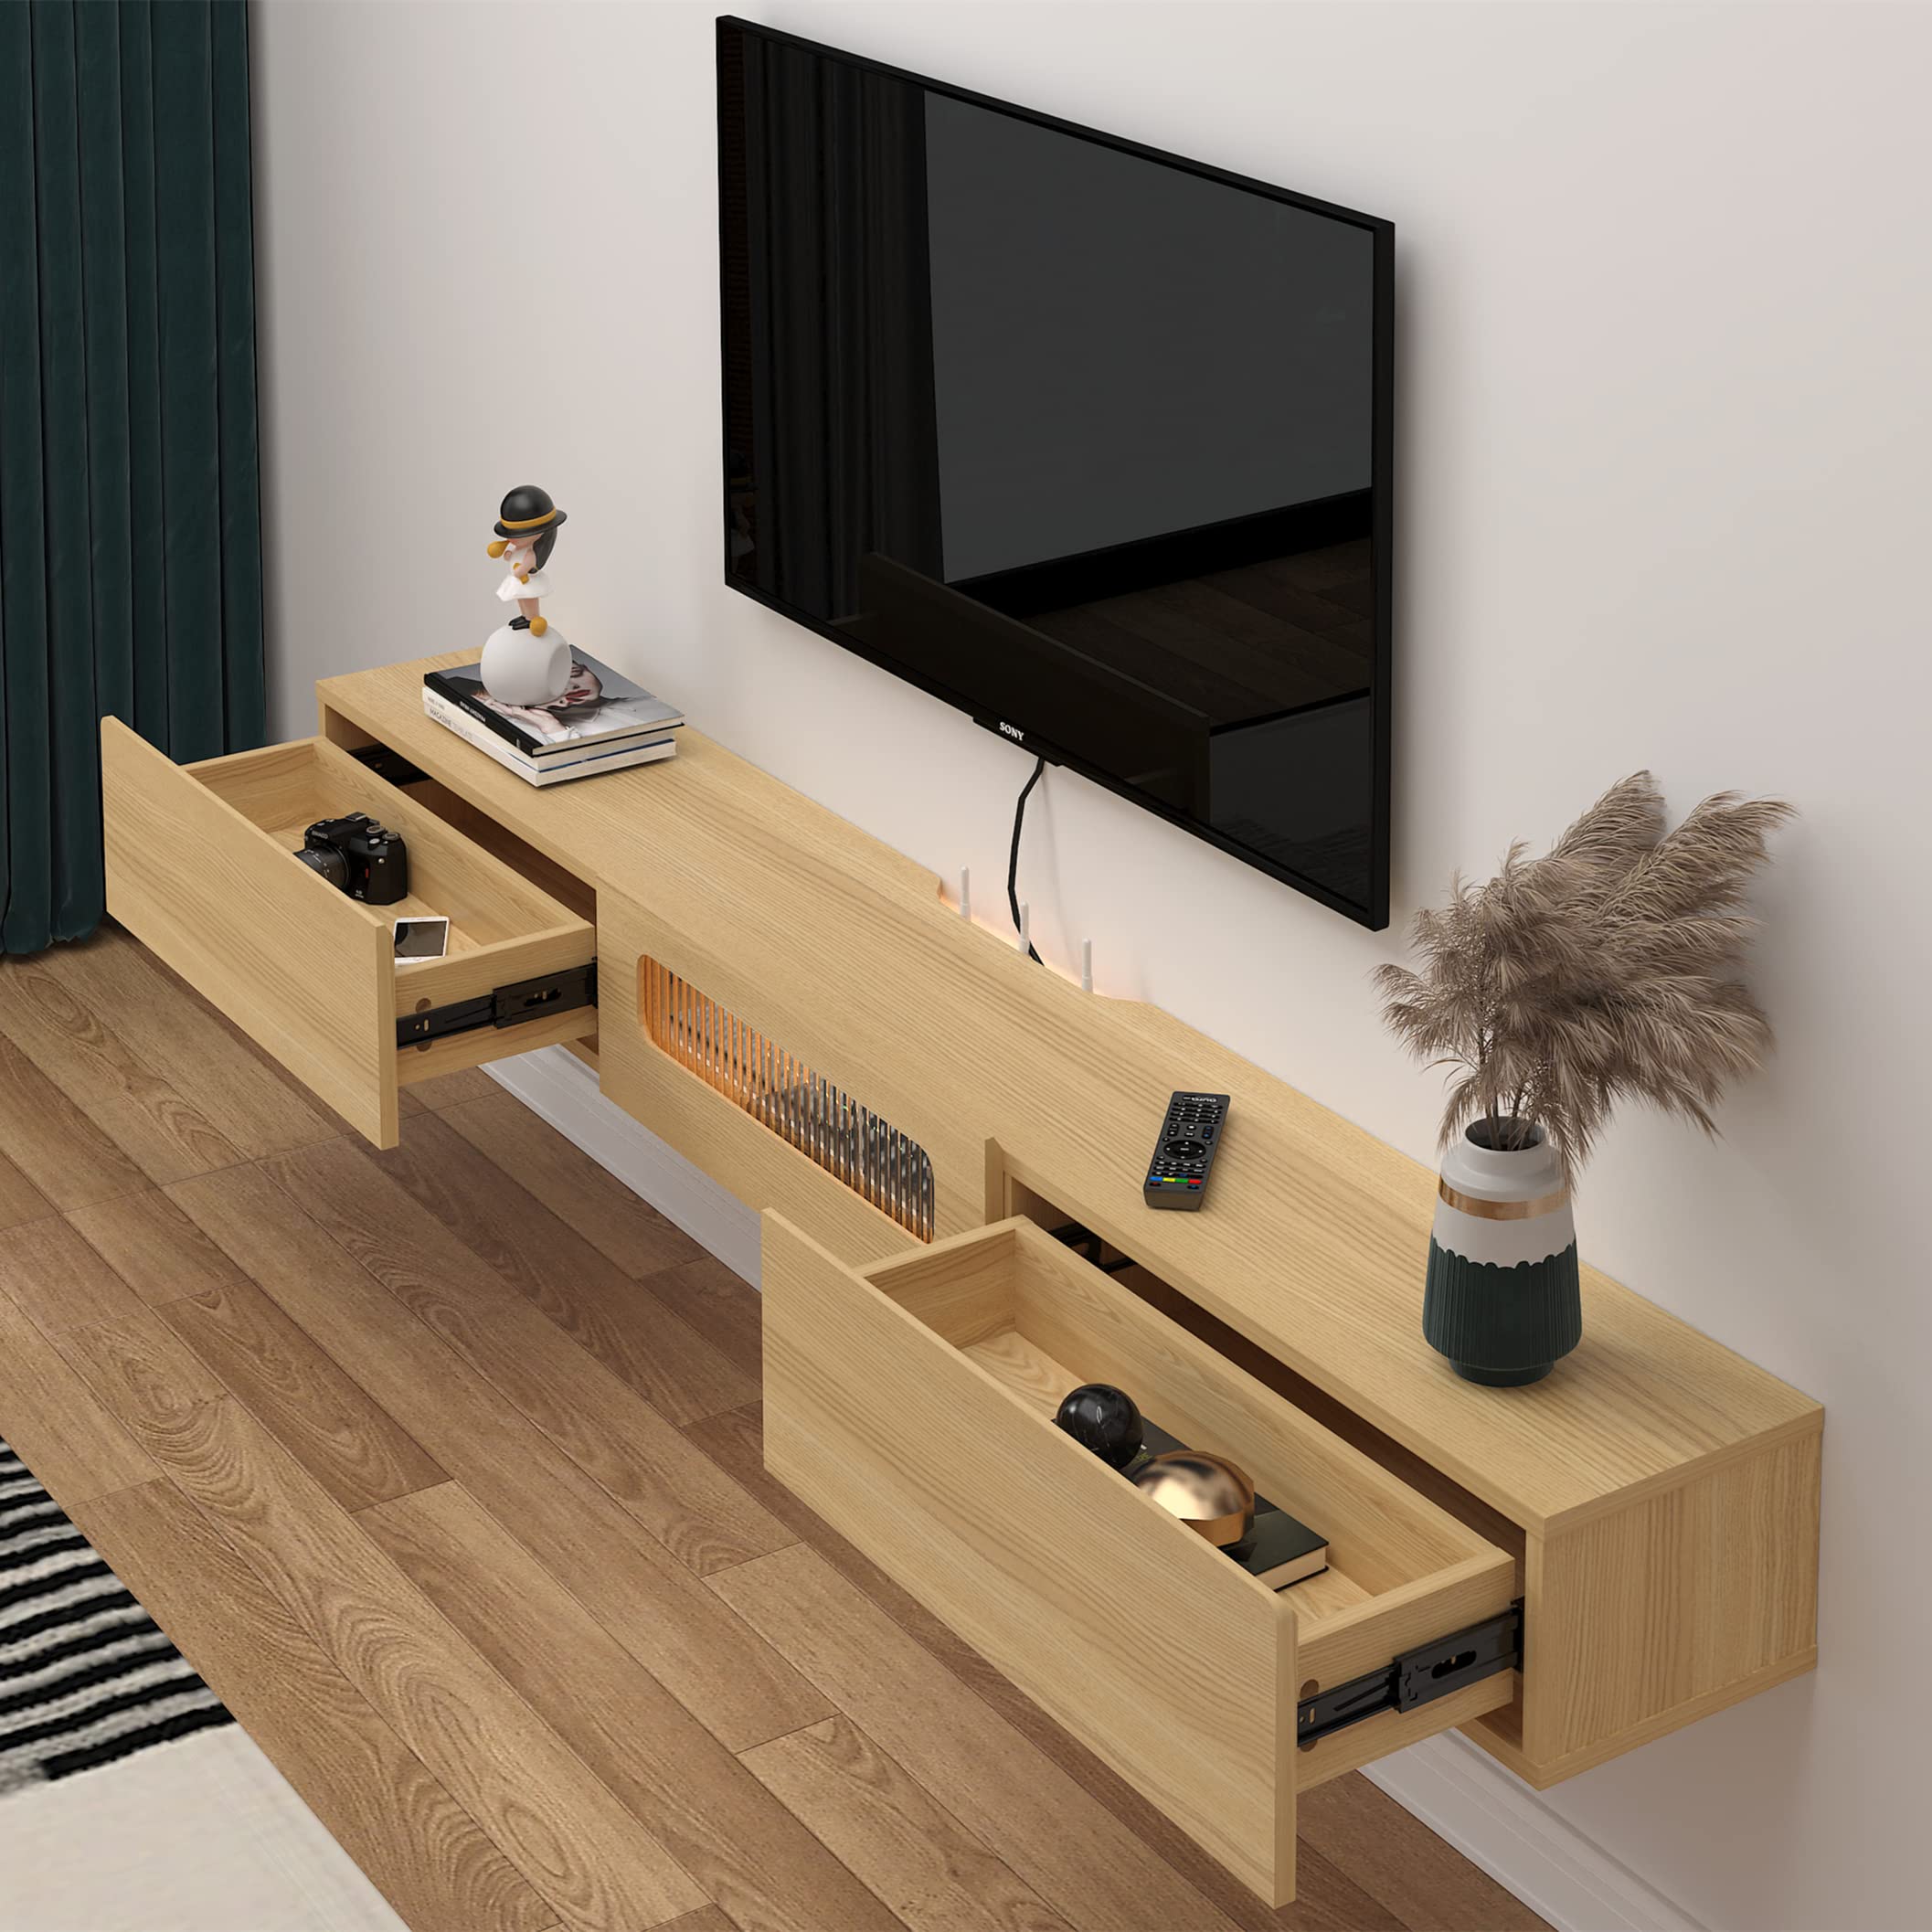 70.86" Light Oak Floating TV Stand with LED Lights and Drawers